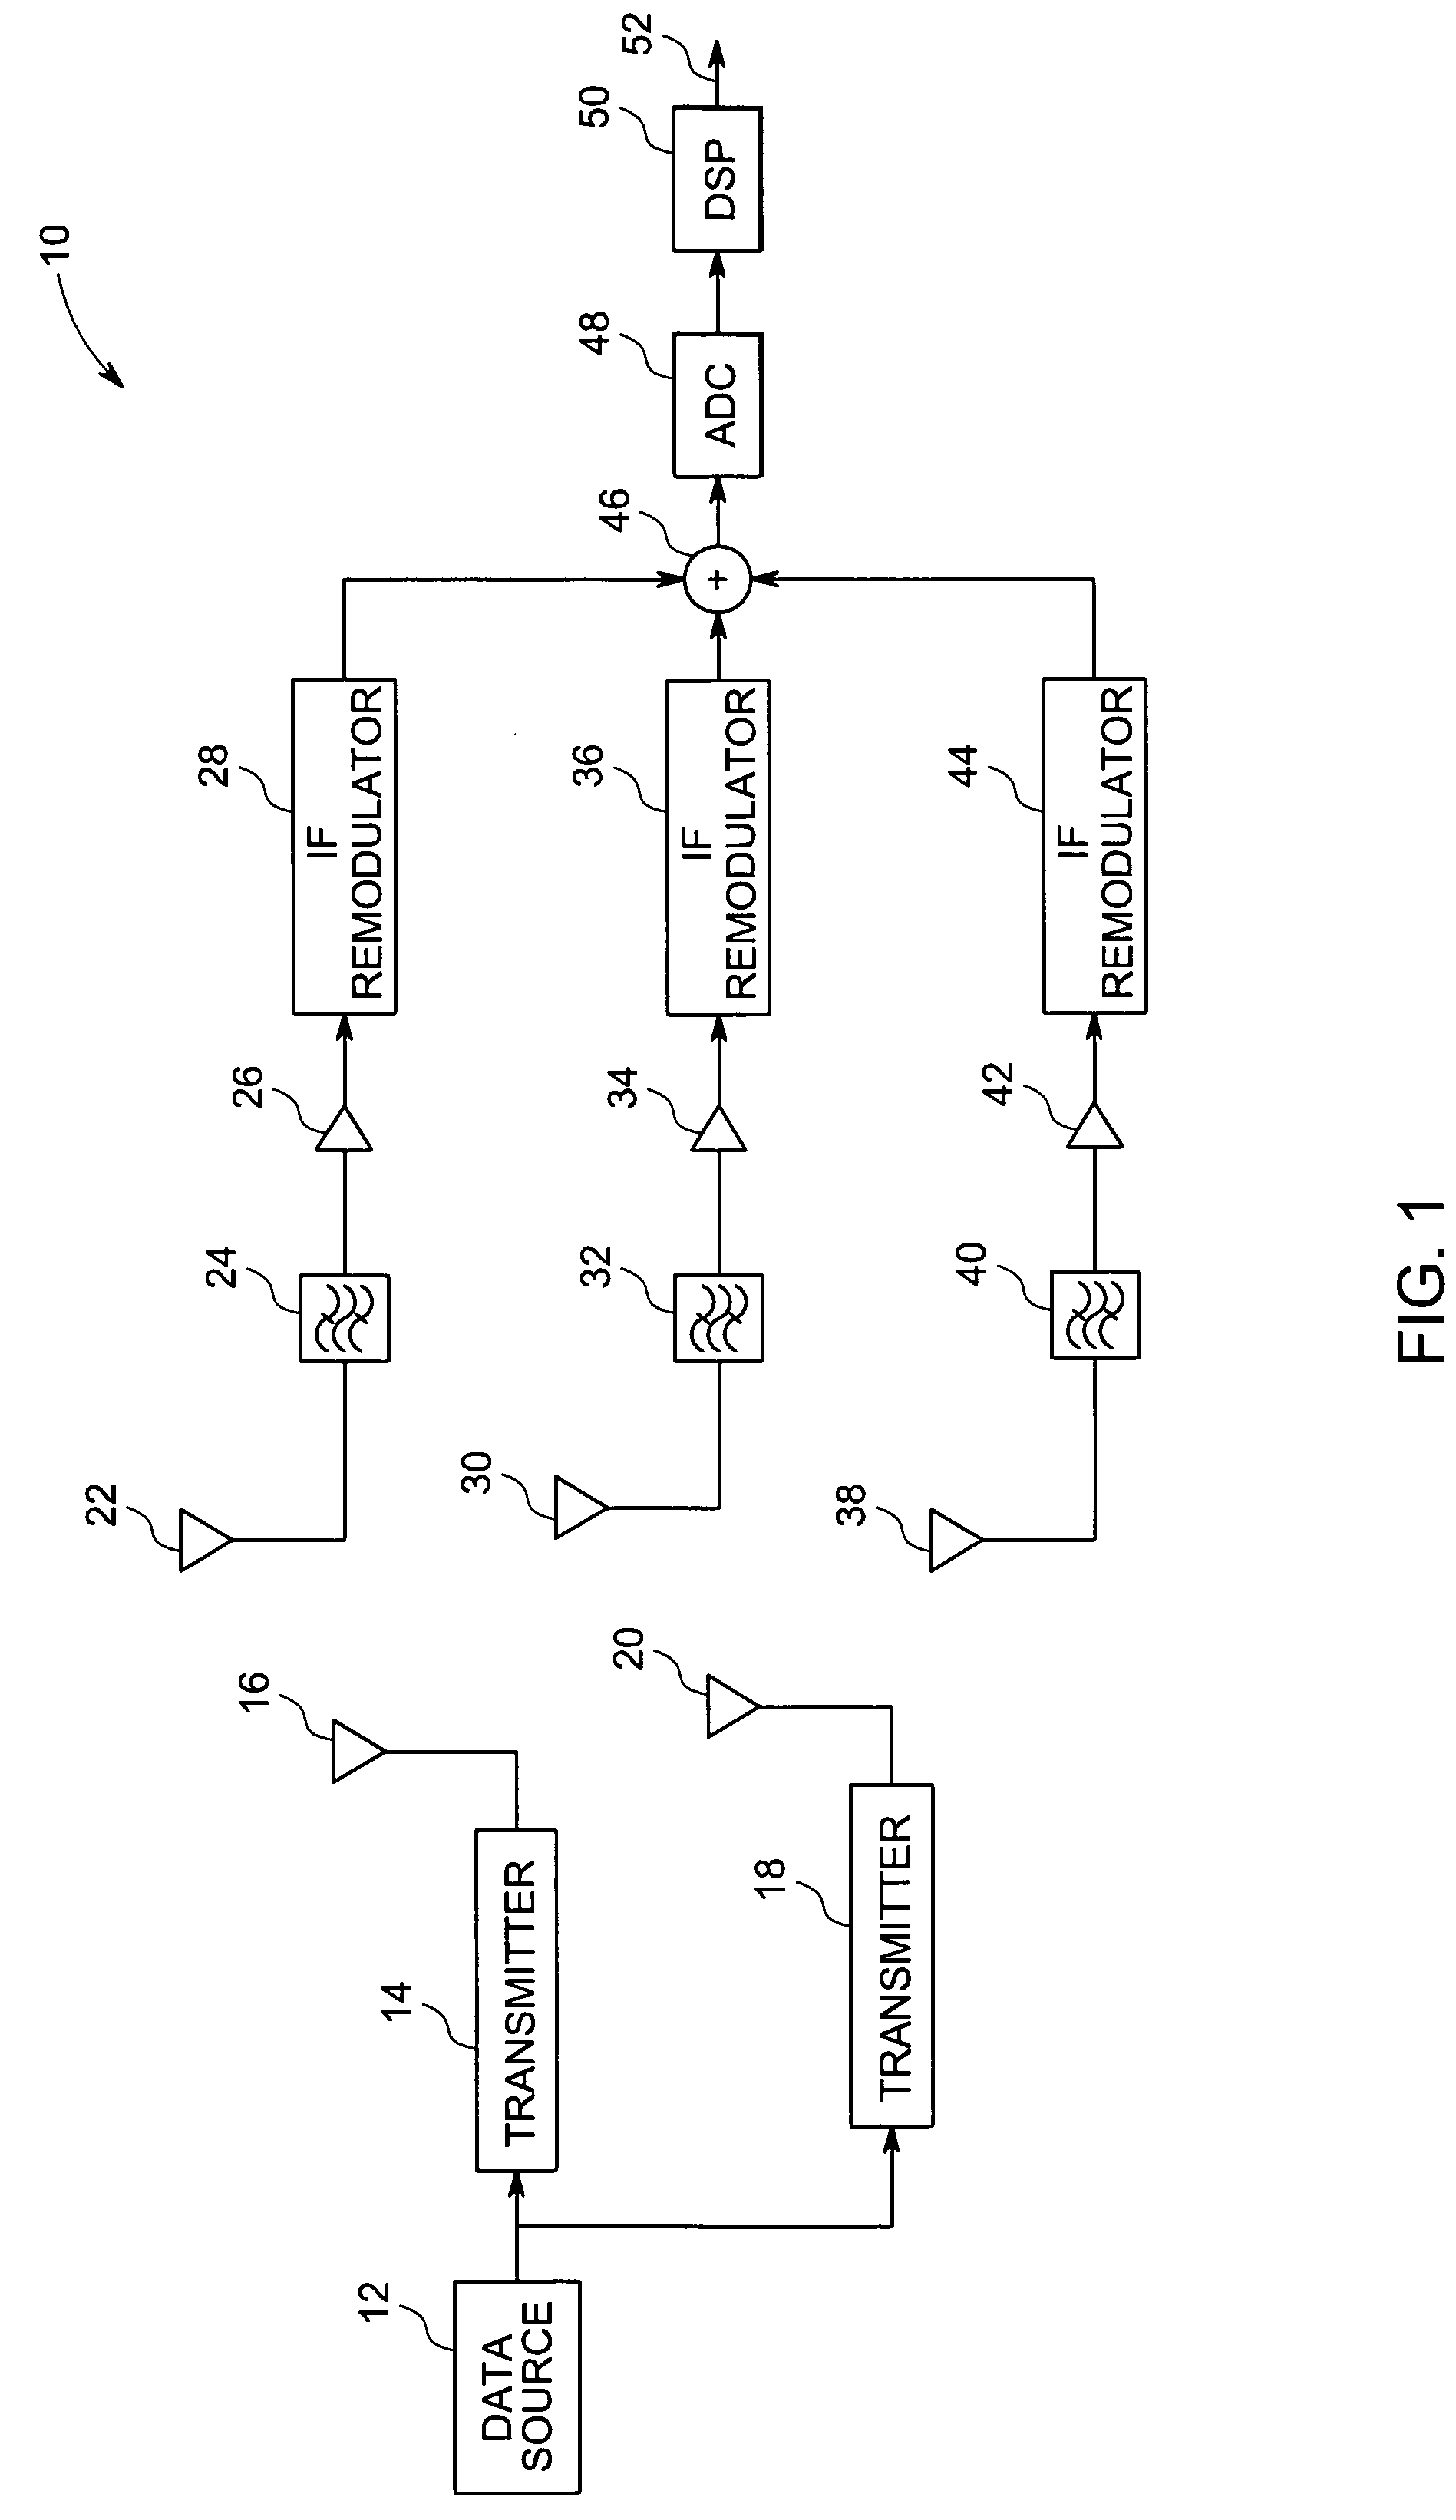 System and method of communicating signals